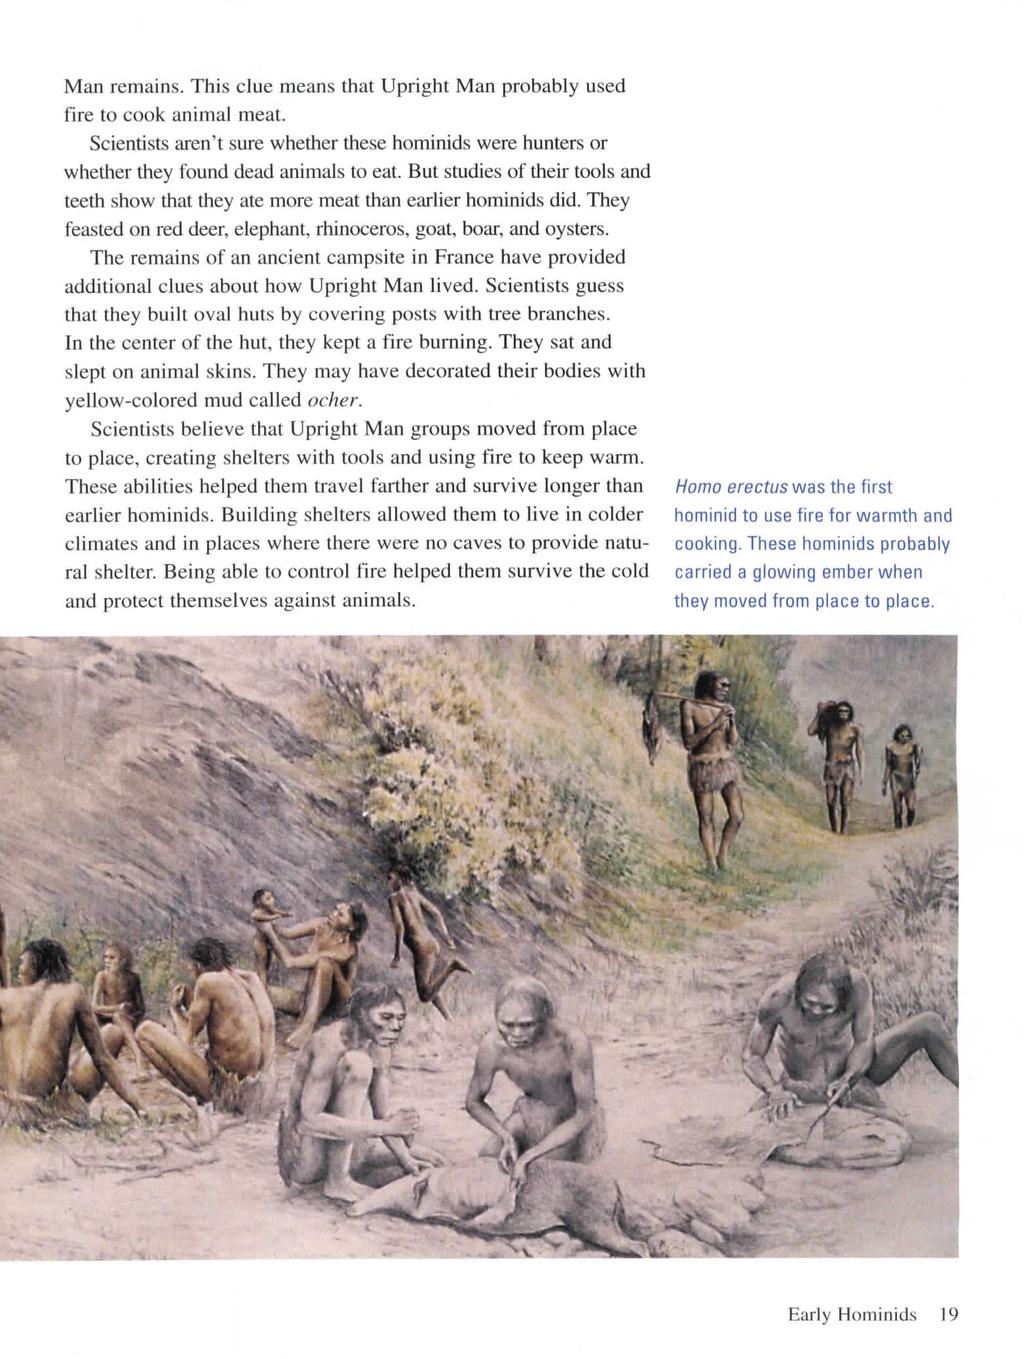 Man remains. This clue means that Upright Man probably used fire to cook animal meat. Scientists aren't sure whether these hominids were hunters or whether they found dead animals to eat.